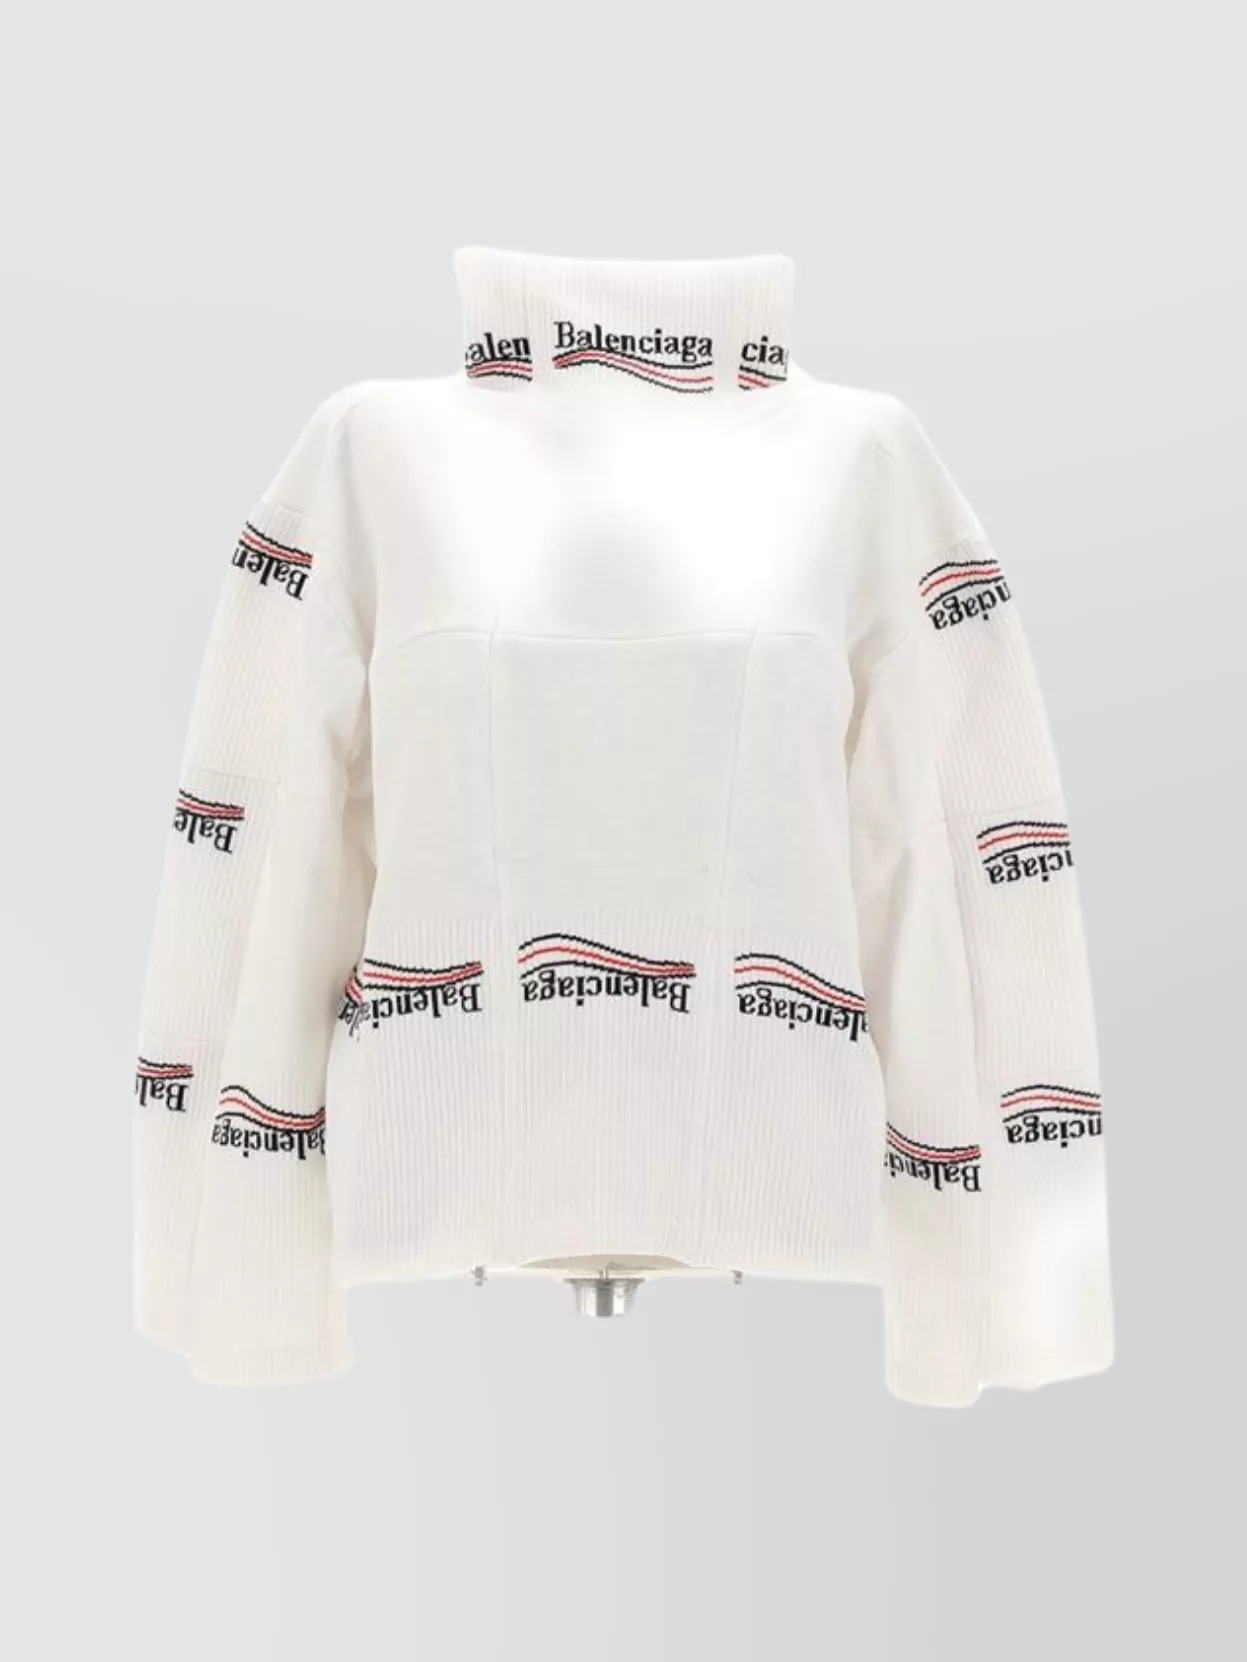 Balenciaga Distressed Jumper Cropped Ribbed Hem In White